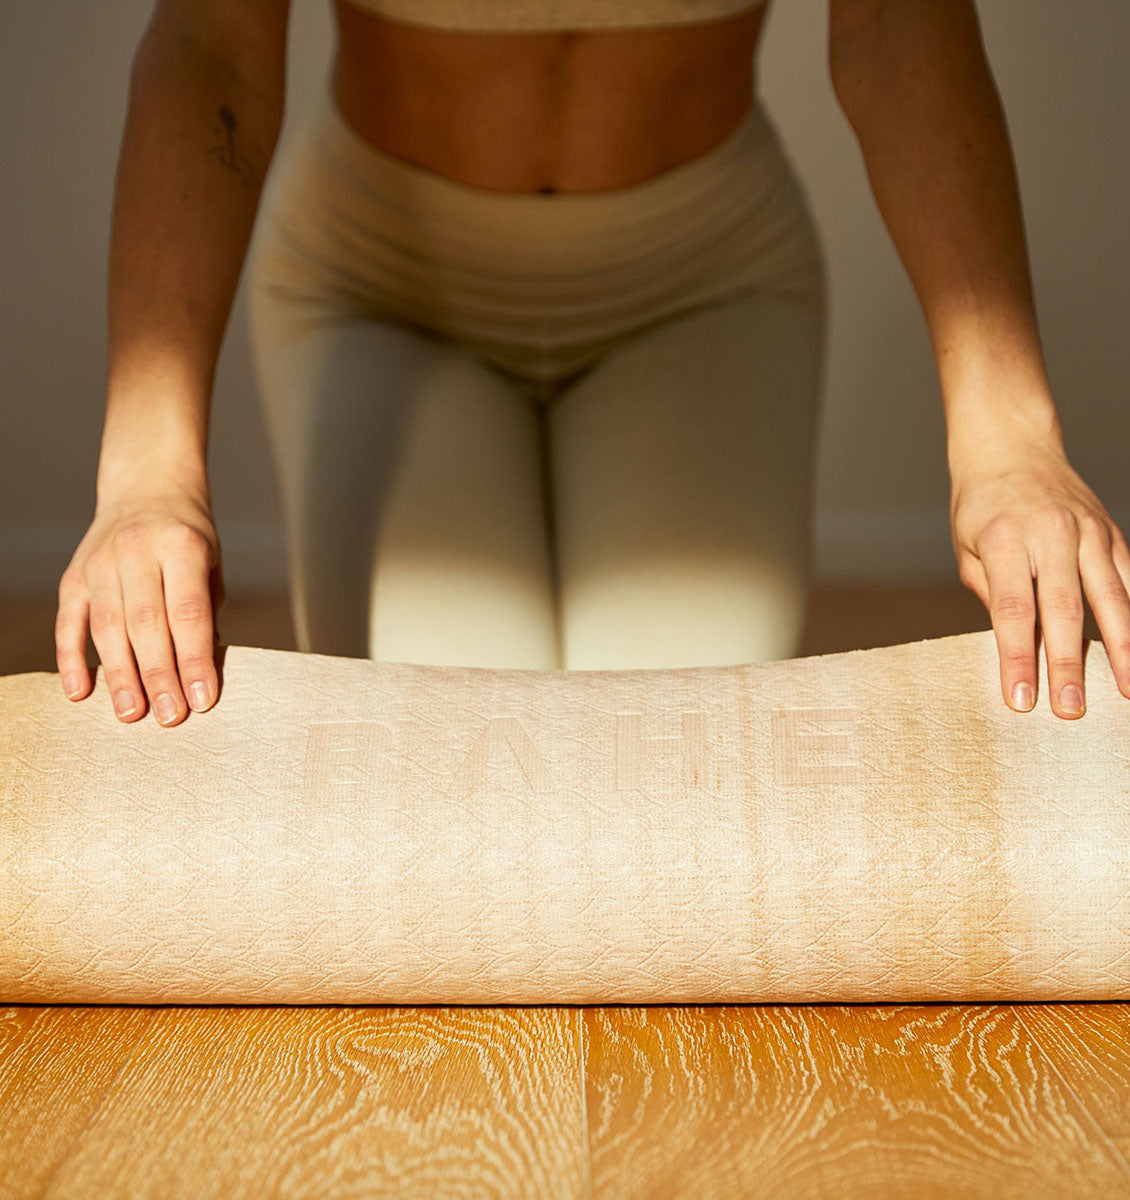 BAHE Prime Support Marble Yoga Mat - 6mm - Dusty Beige Marble - Lifestyle - 8